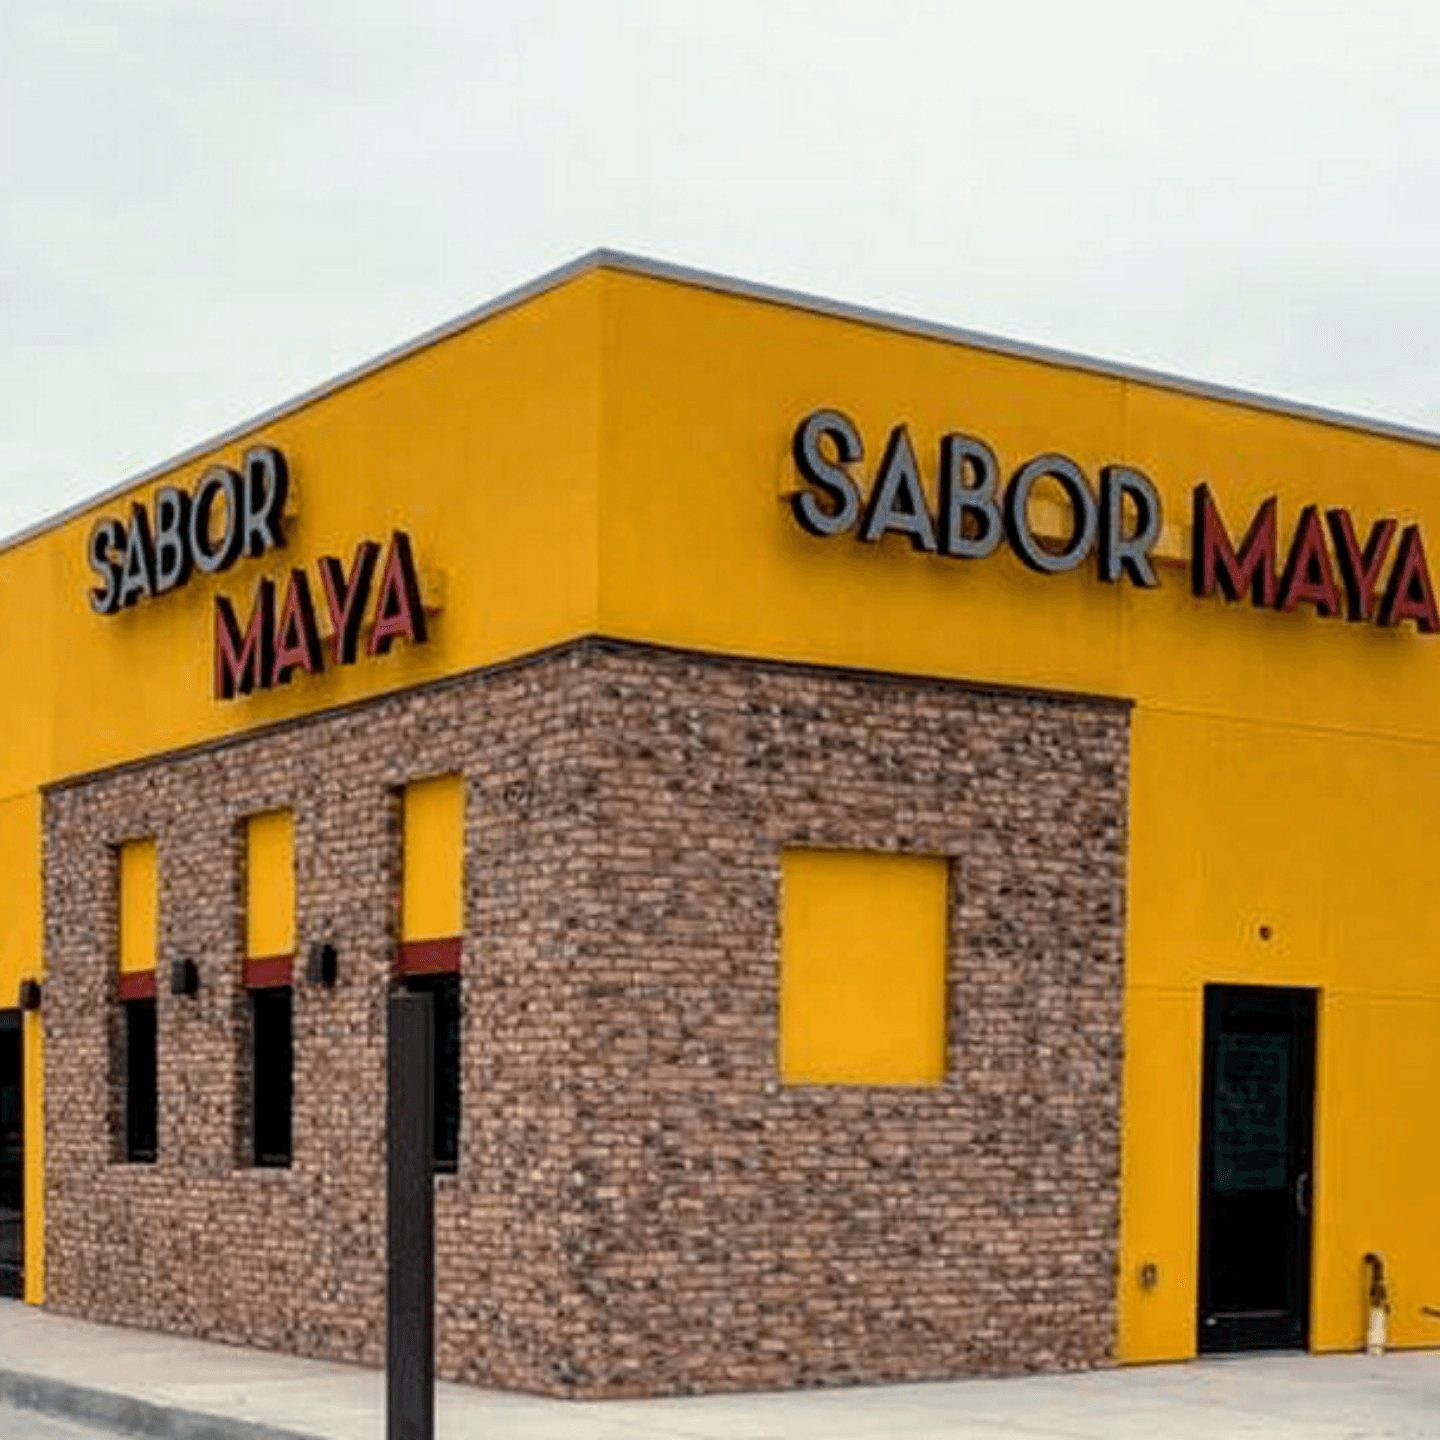 Welcome To Sabor Maya Mexican Cuisine!